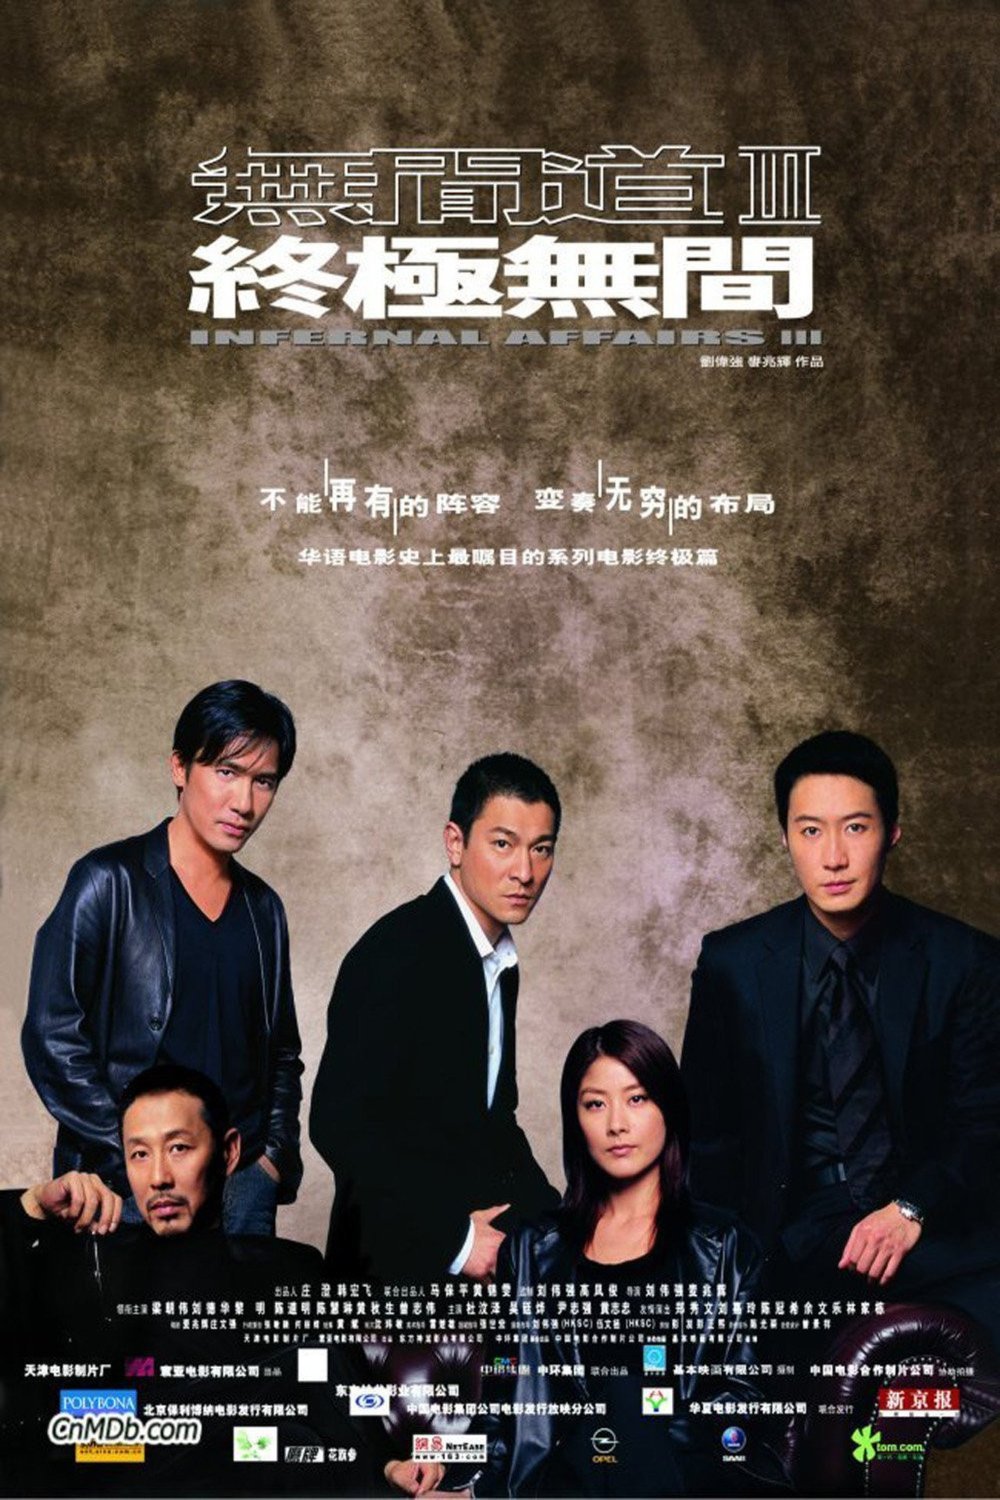 Cantonese poster of the movie Infernal Affairs III